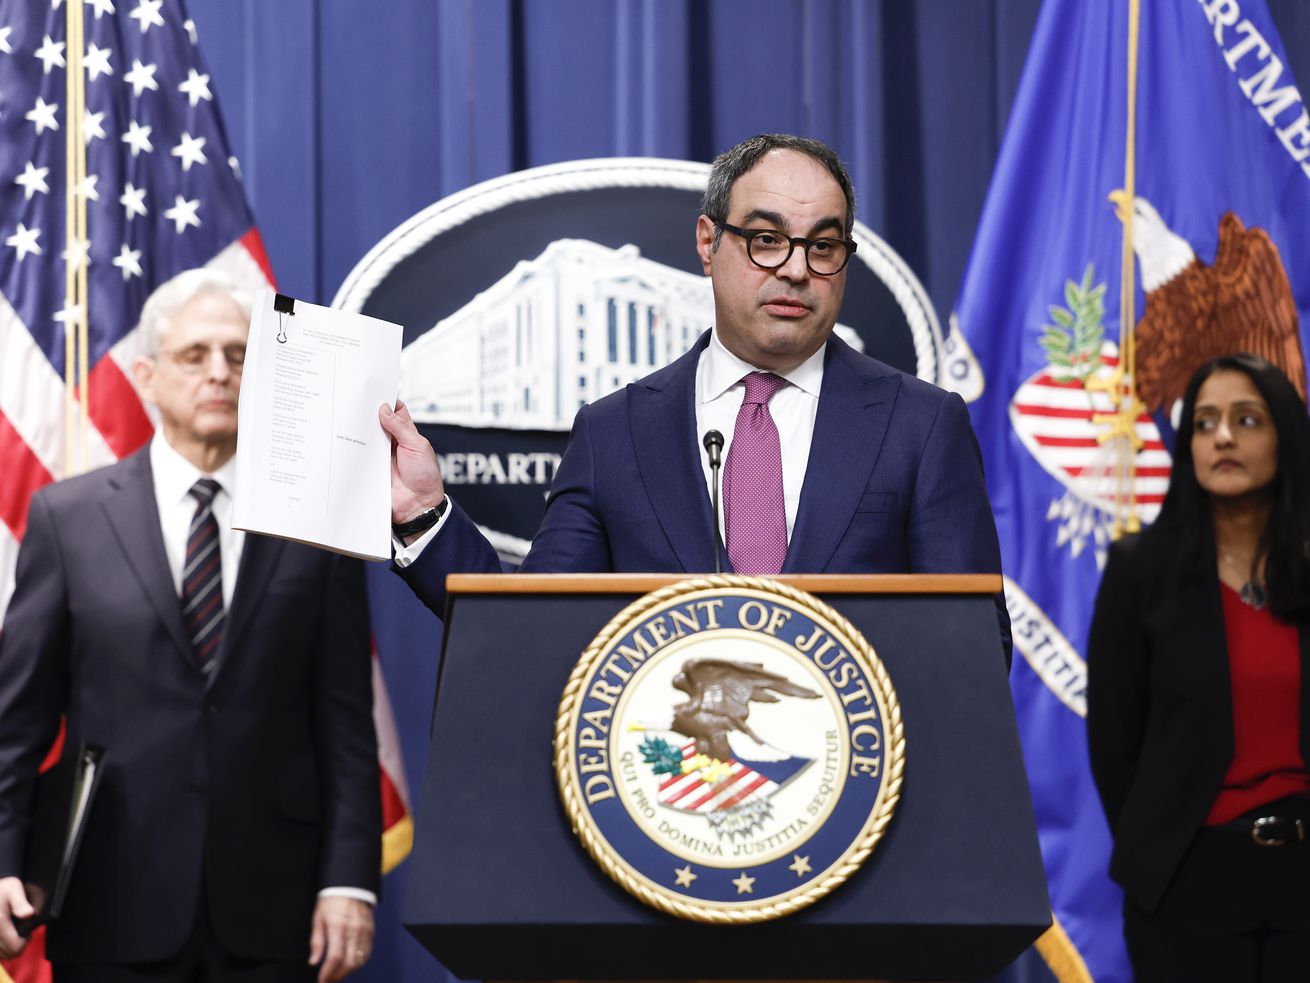 Jonathan Kanter holds up a document as he speaks alongside Attorney General Merrick Garland and Associate Attorney General Vanita Gupta at the Justice Department press podium with flags and a seal behind him. 